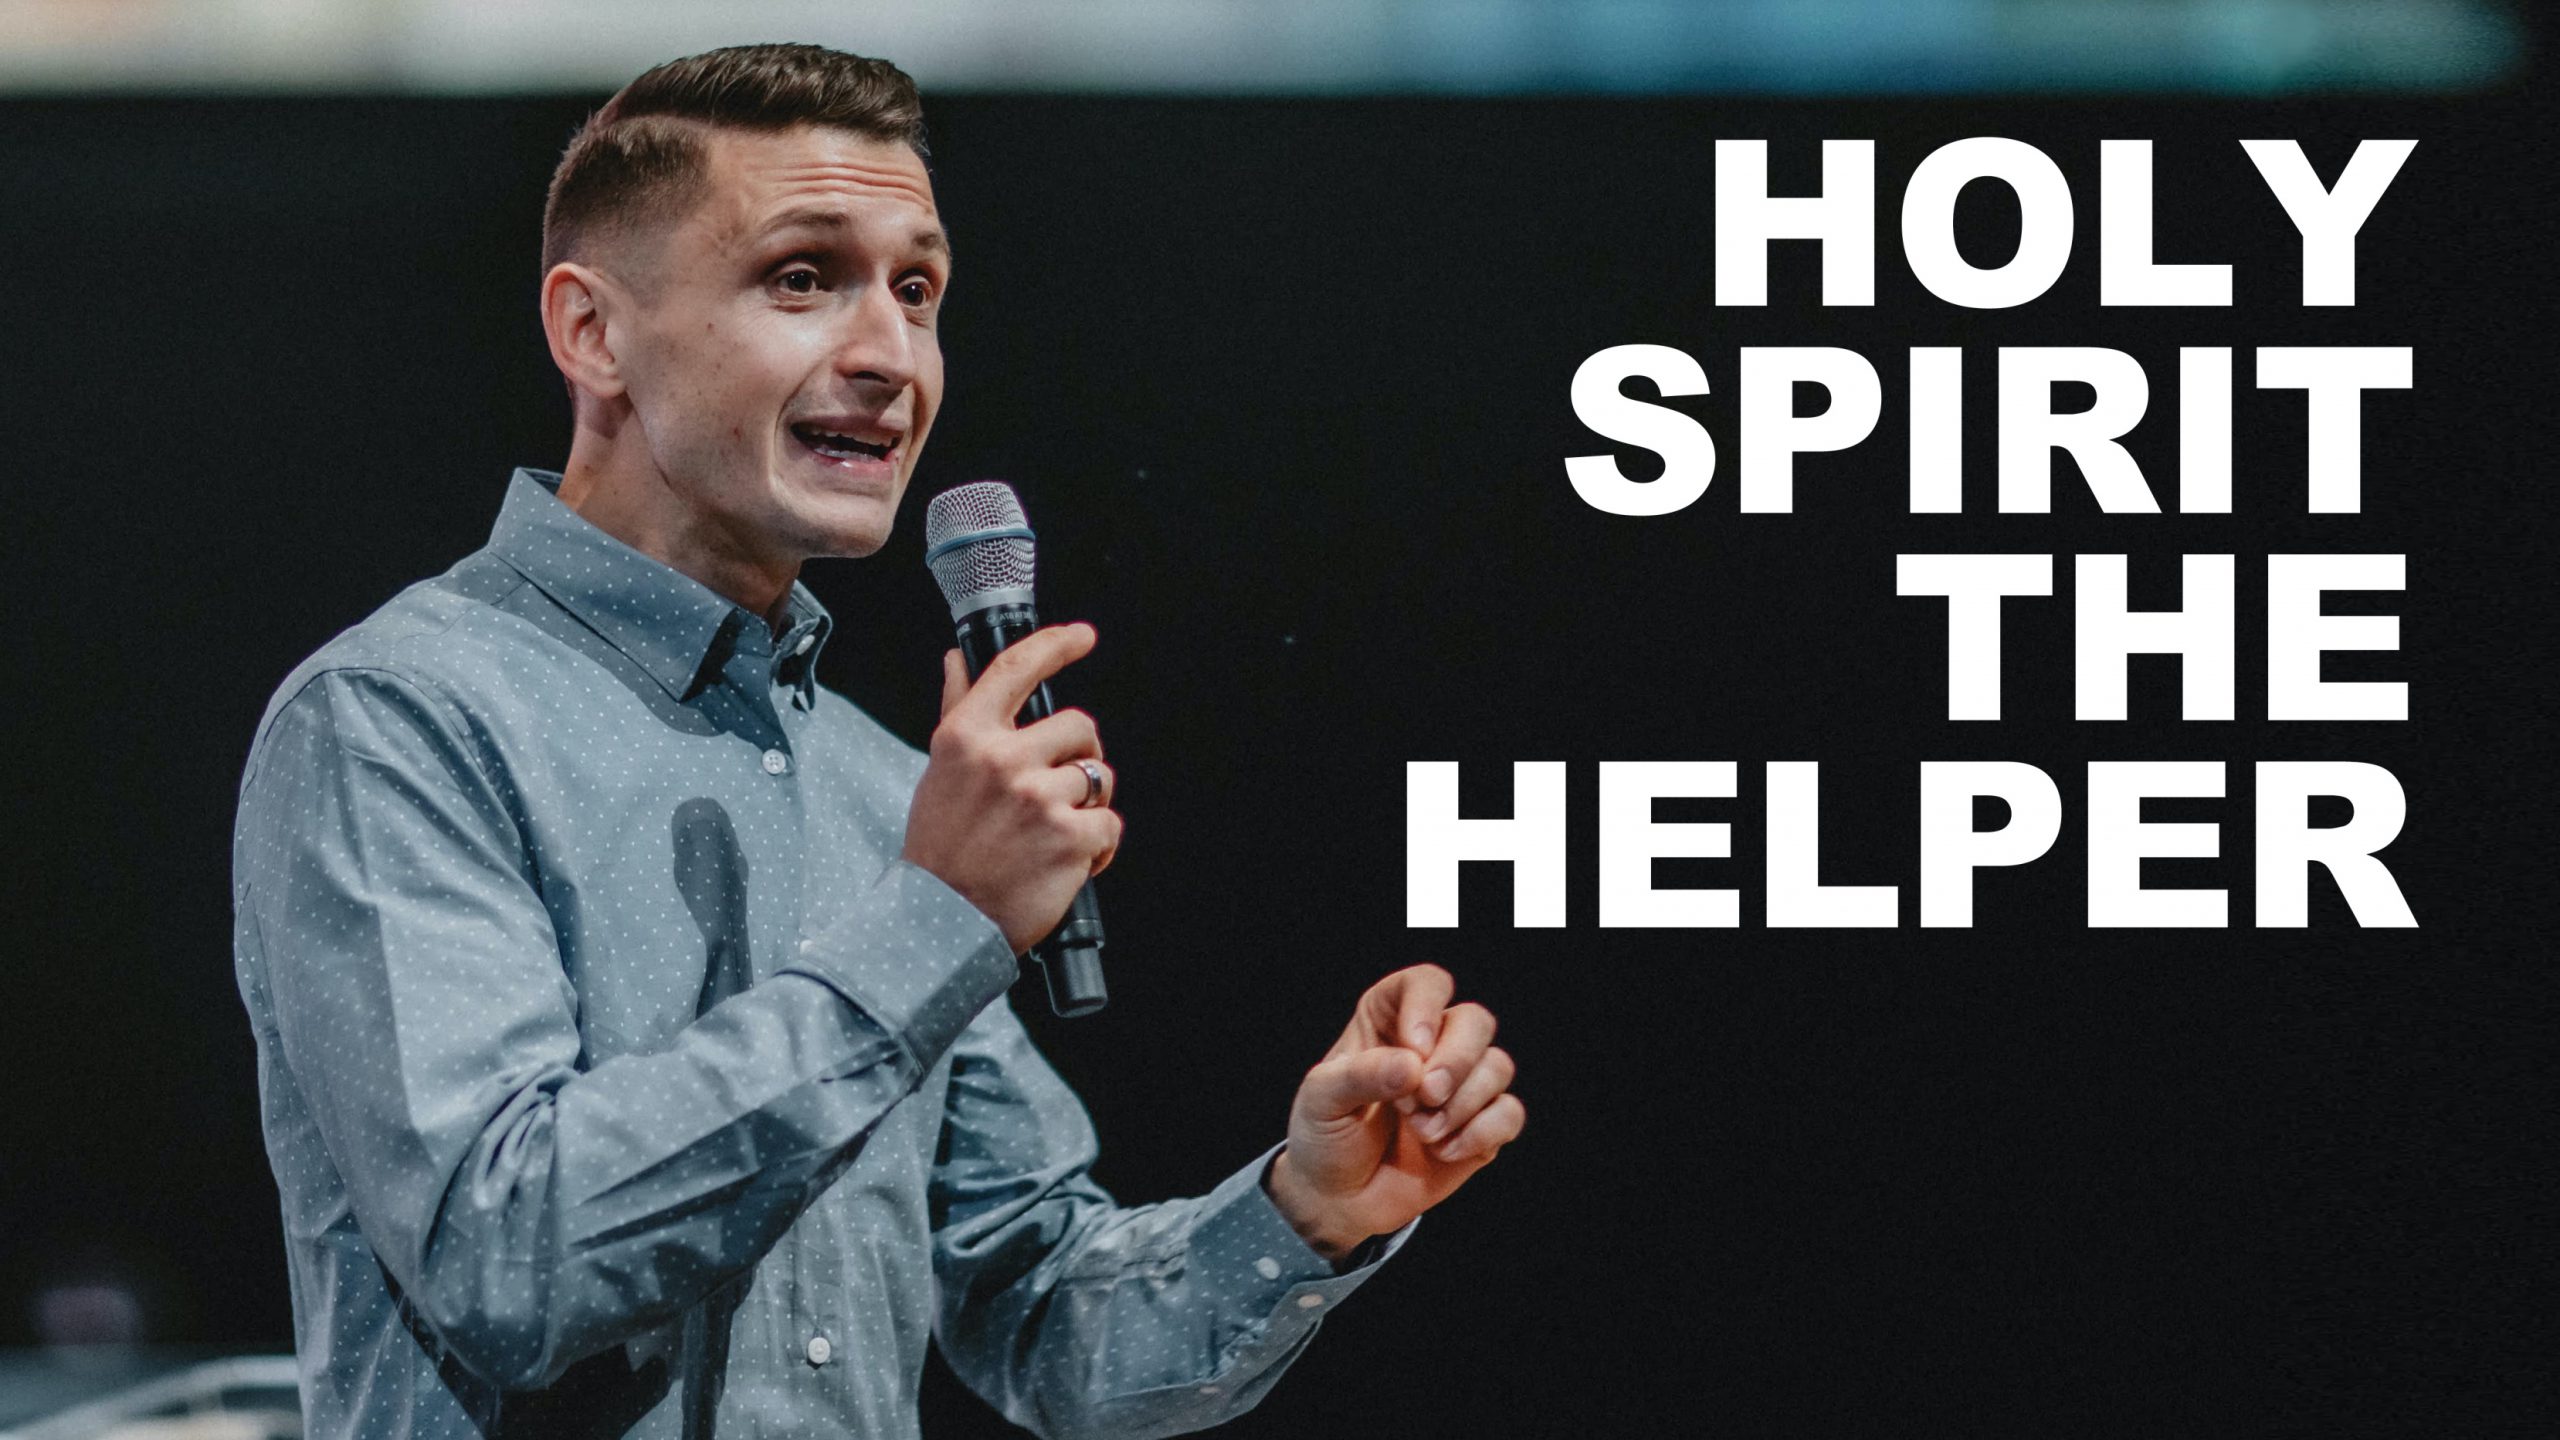 Featured image for “Holy Spirit, The Helper”